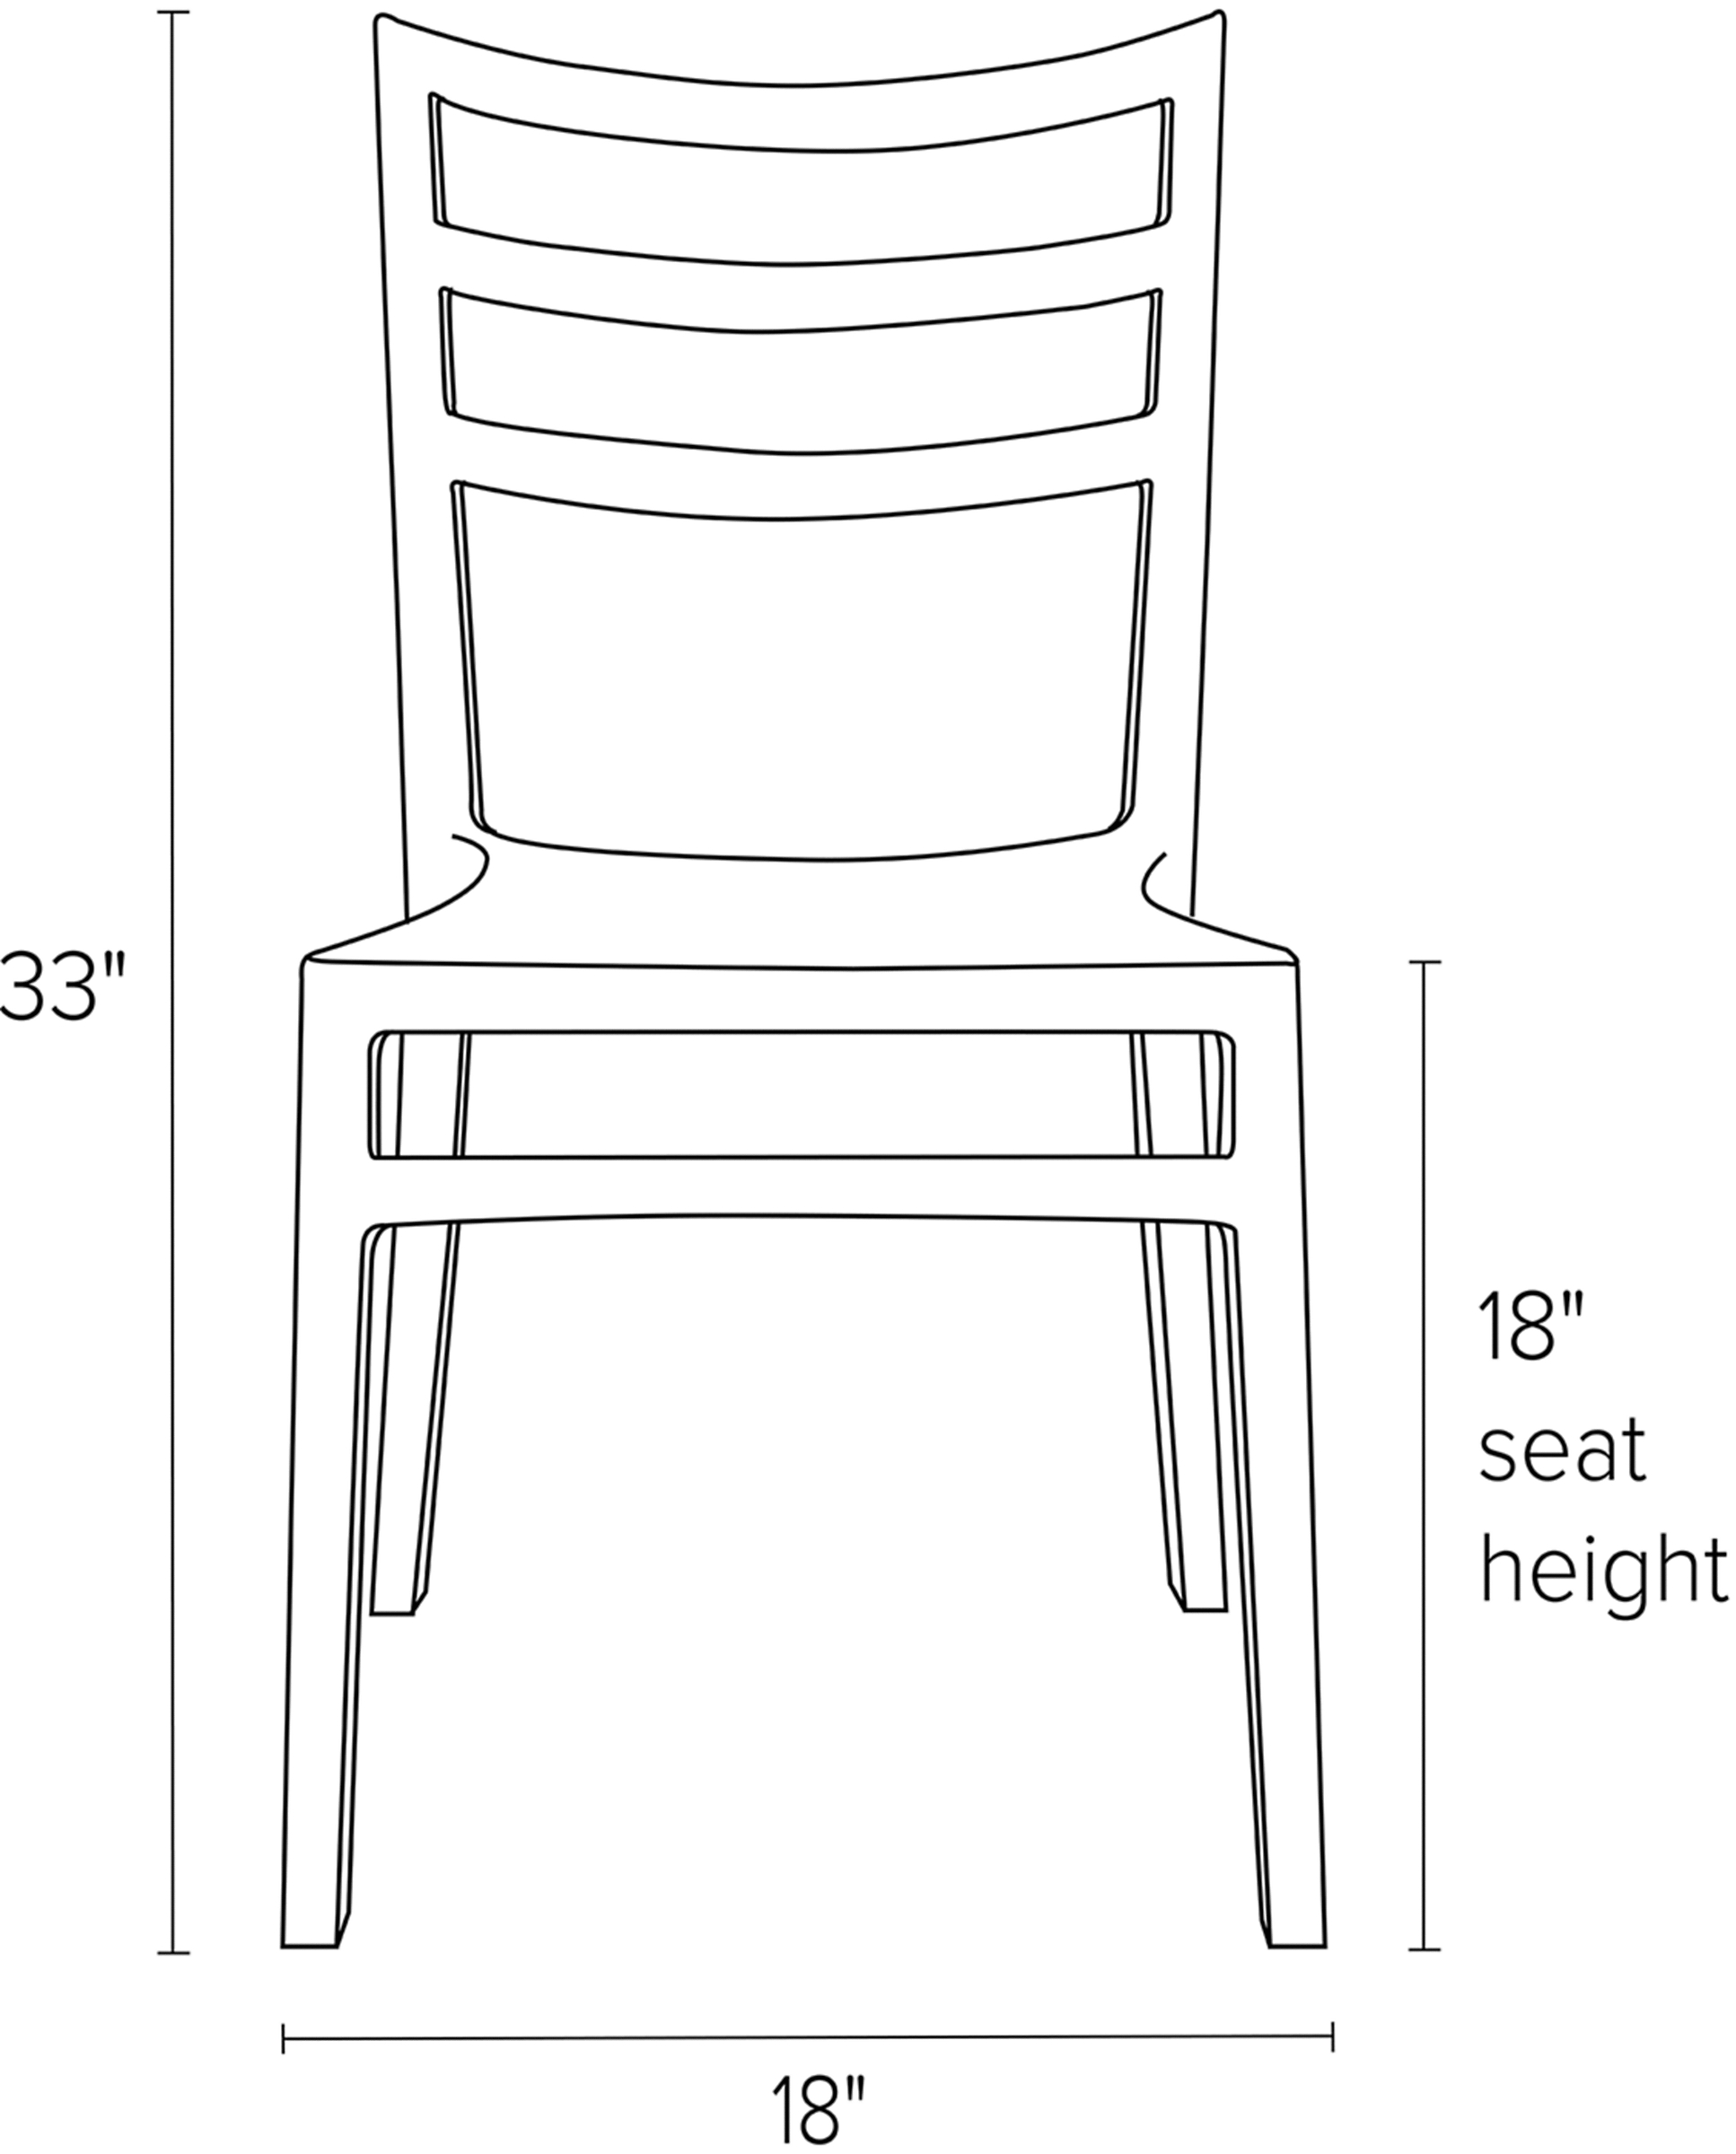 Front view dimension illustration of Sabrina side chair.